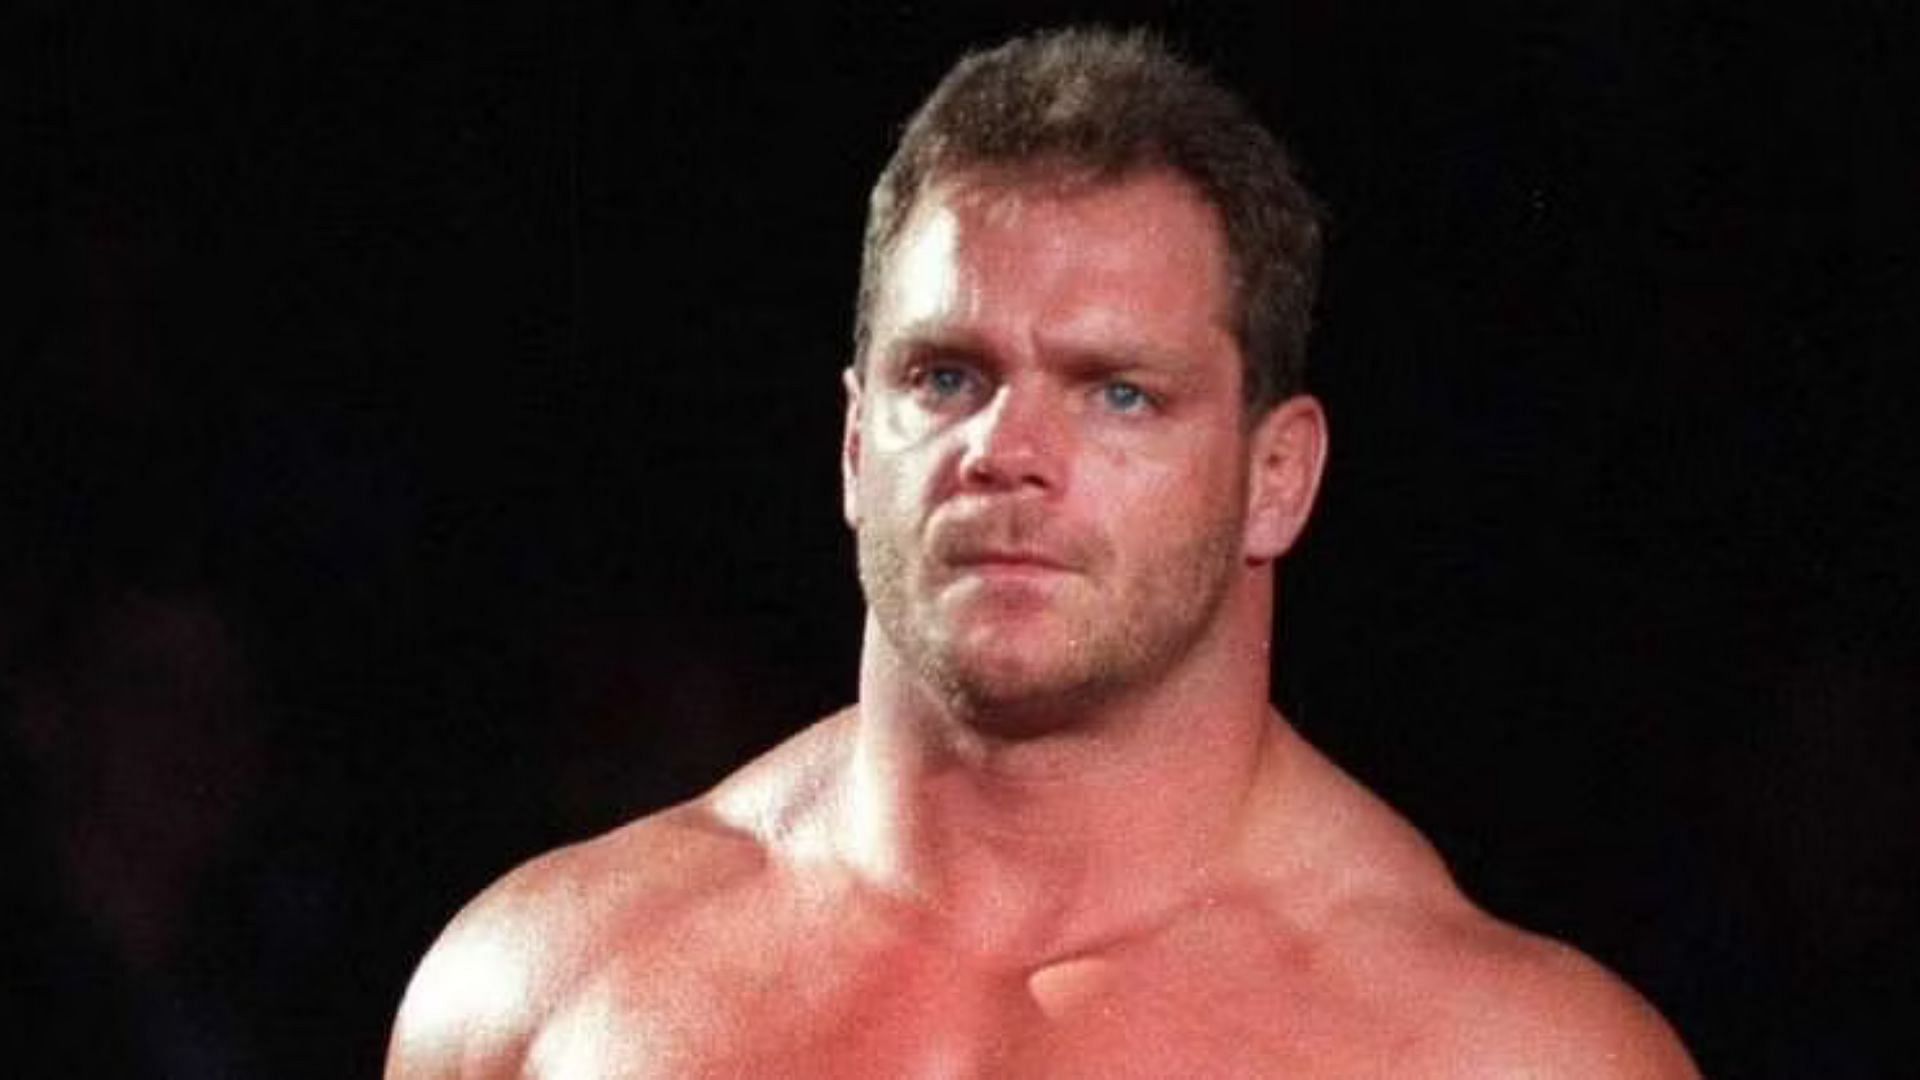 Chris Benoit was one of the most infamous wrestlers in the industry